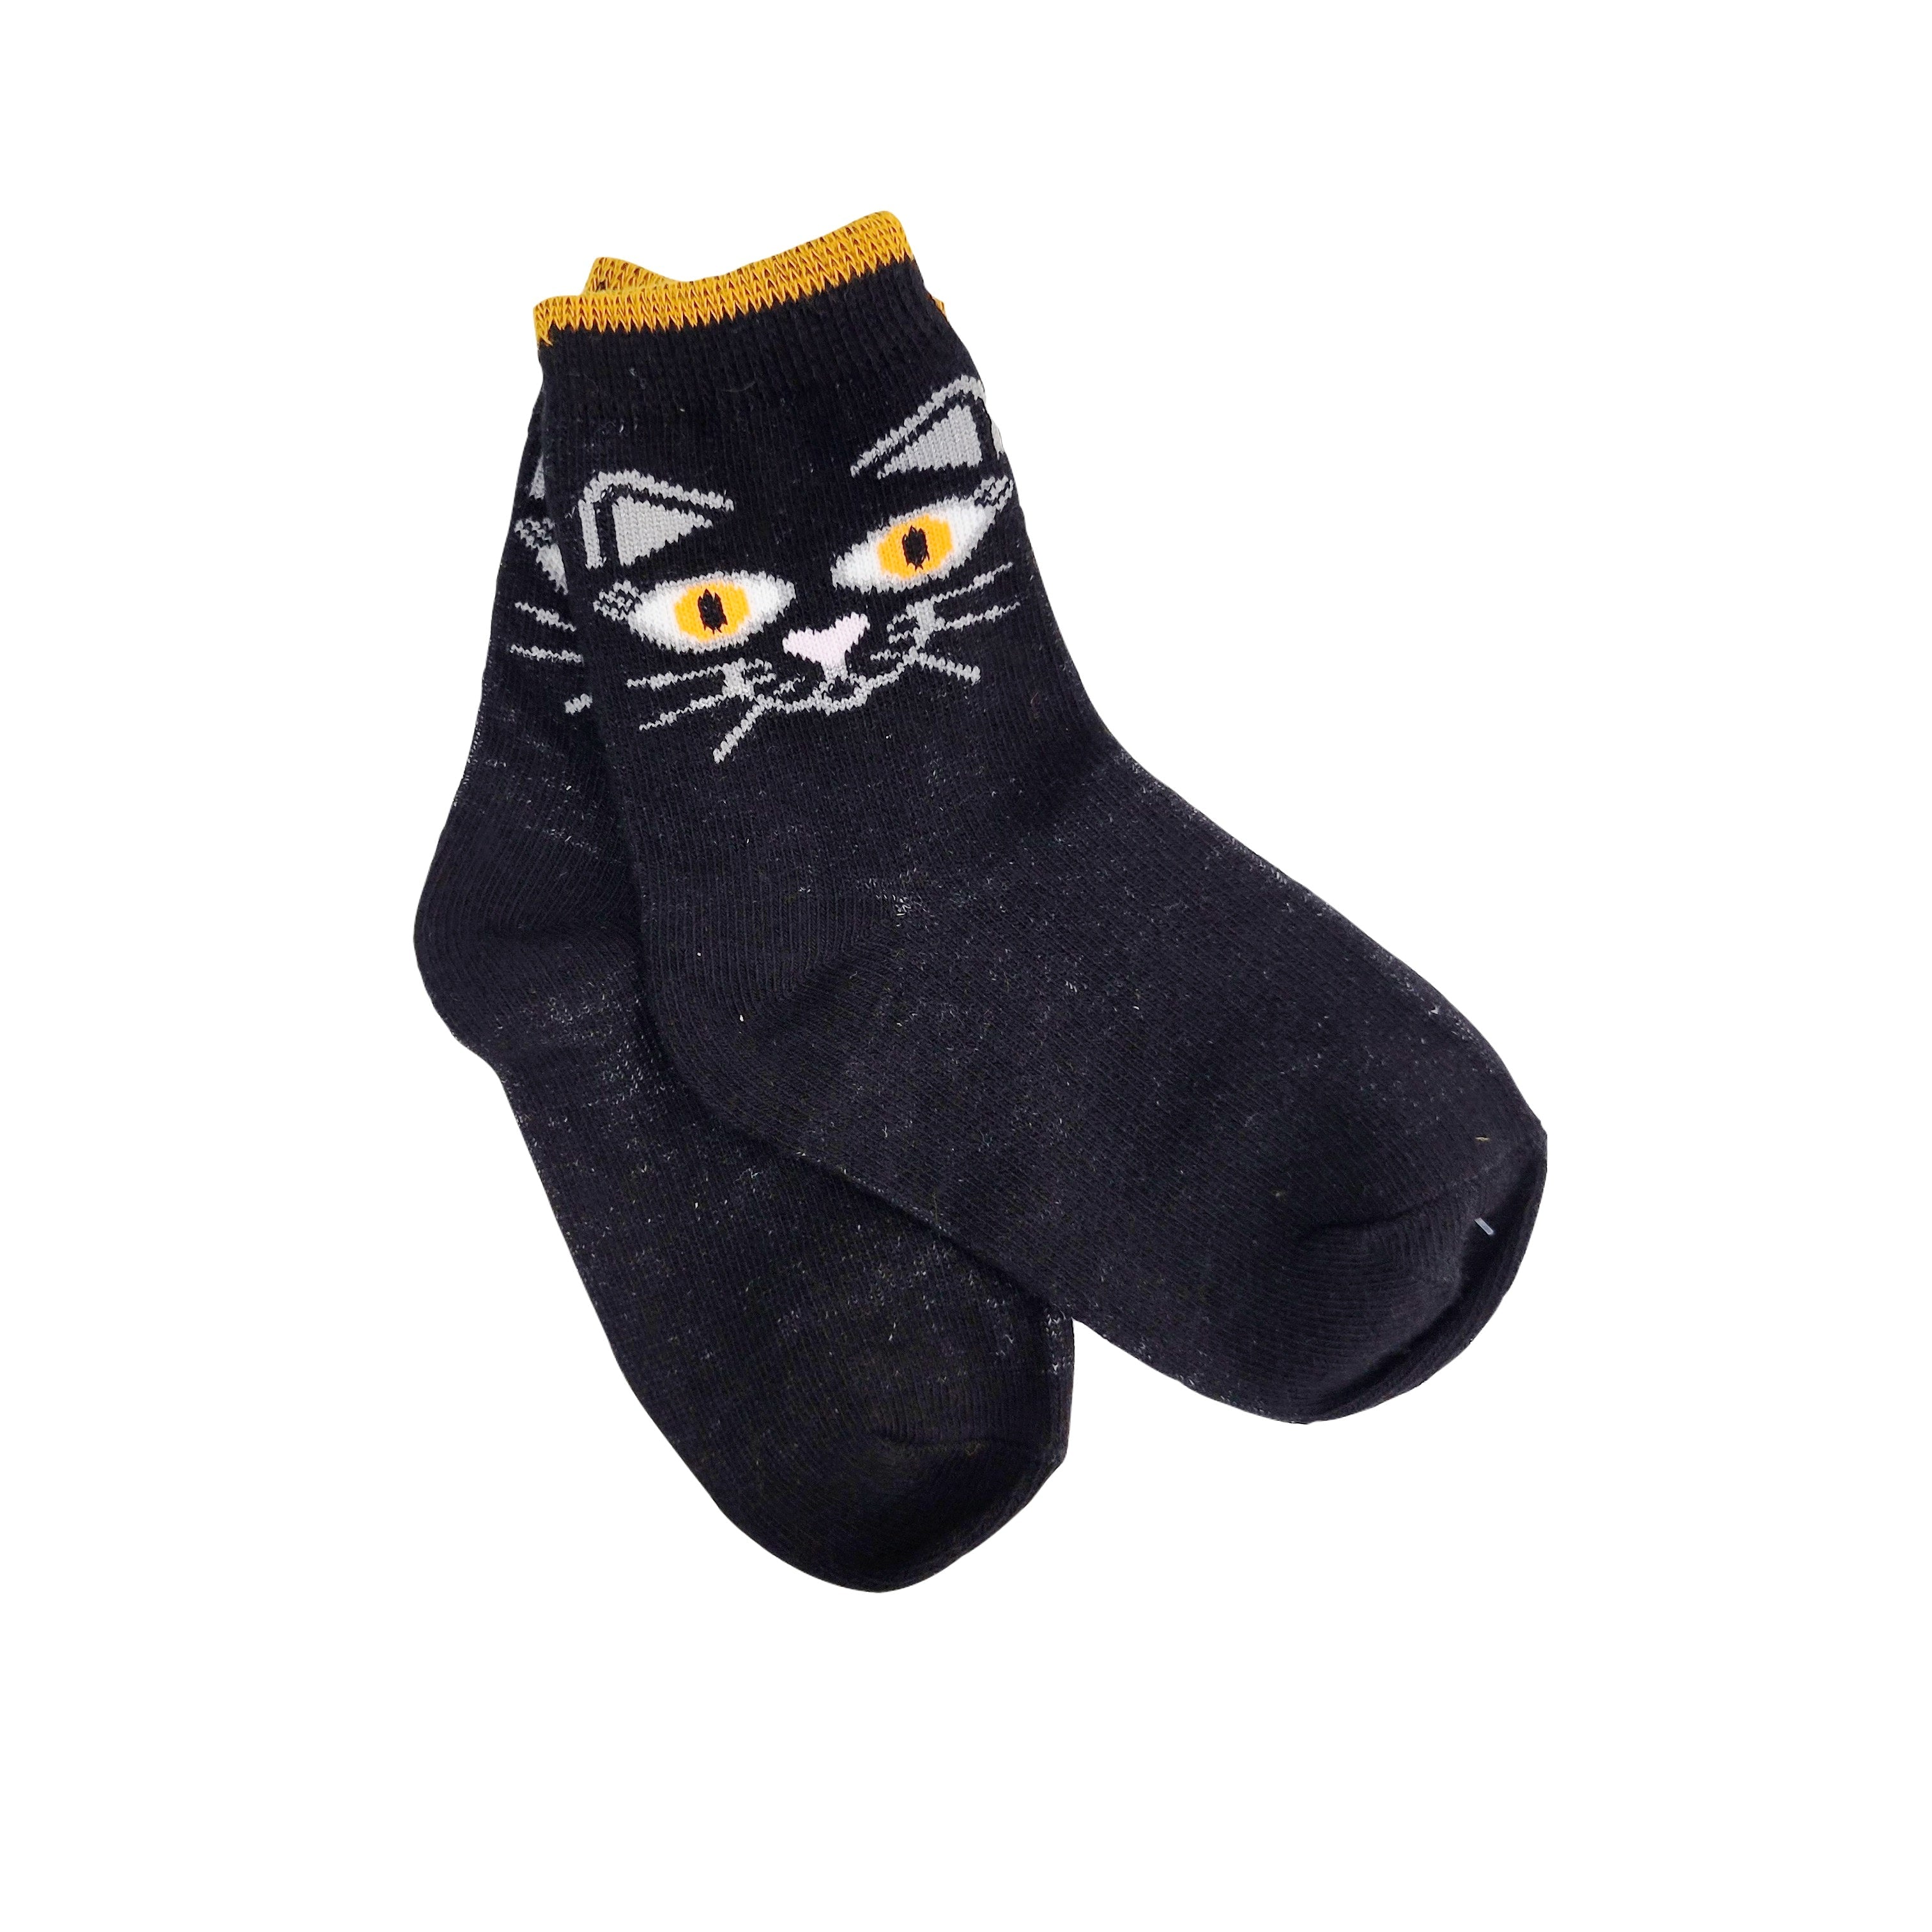 Spooky Halloween Kids Socks (Ages 1-2) - Non-Skid and (Ages 3-5, 5-7))